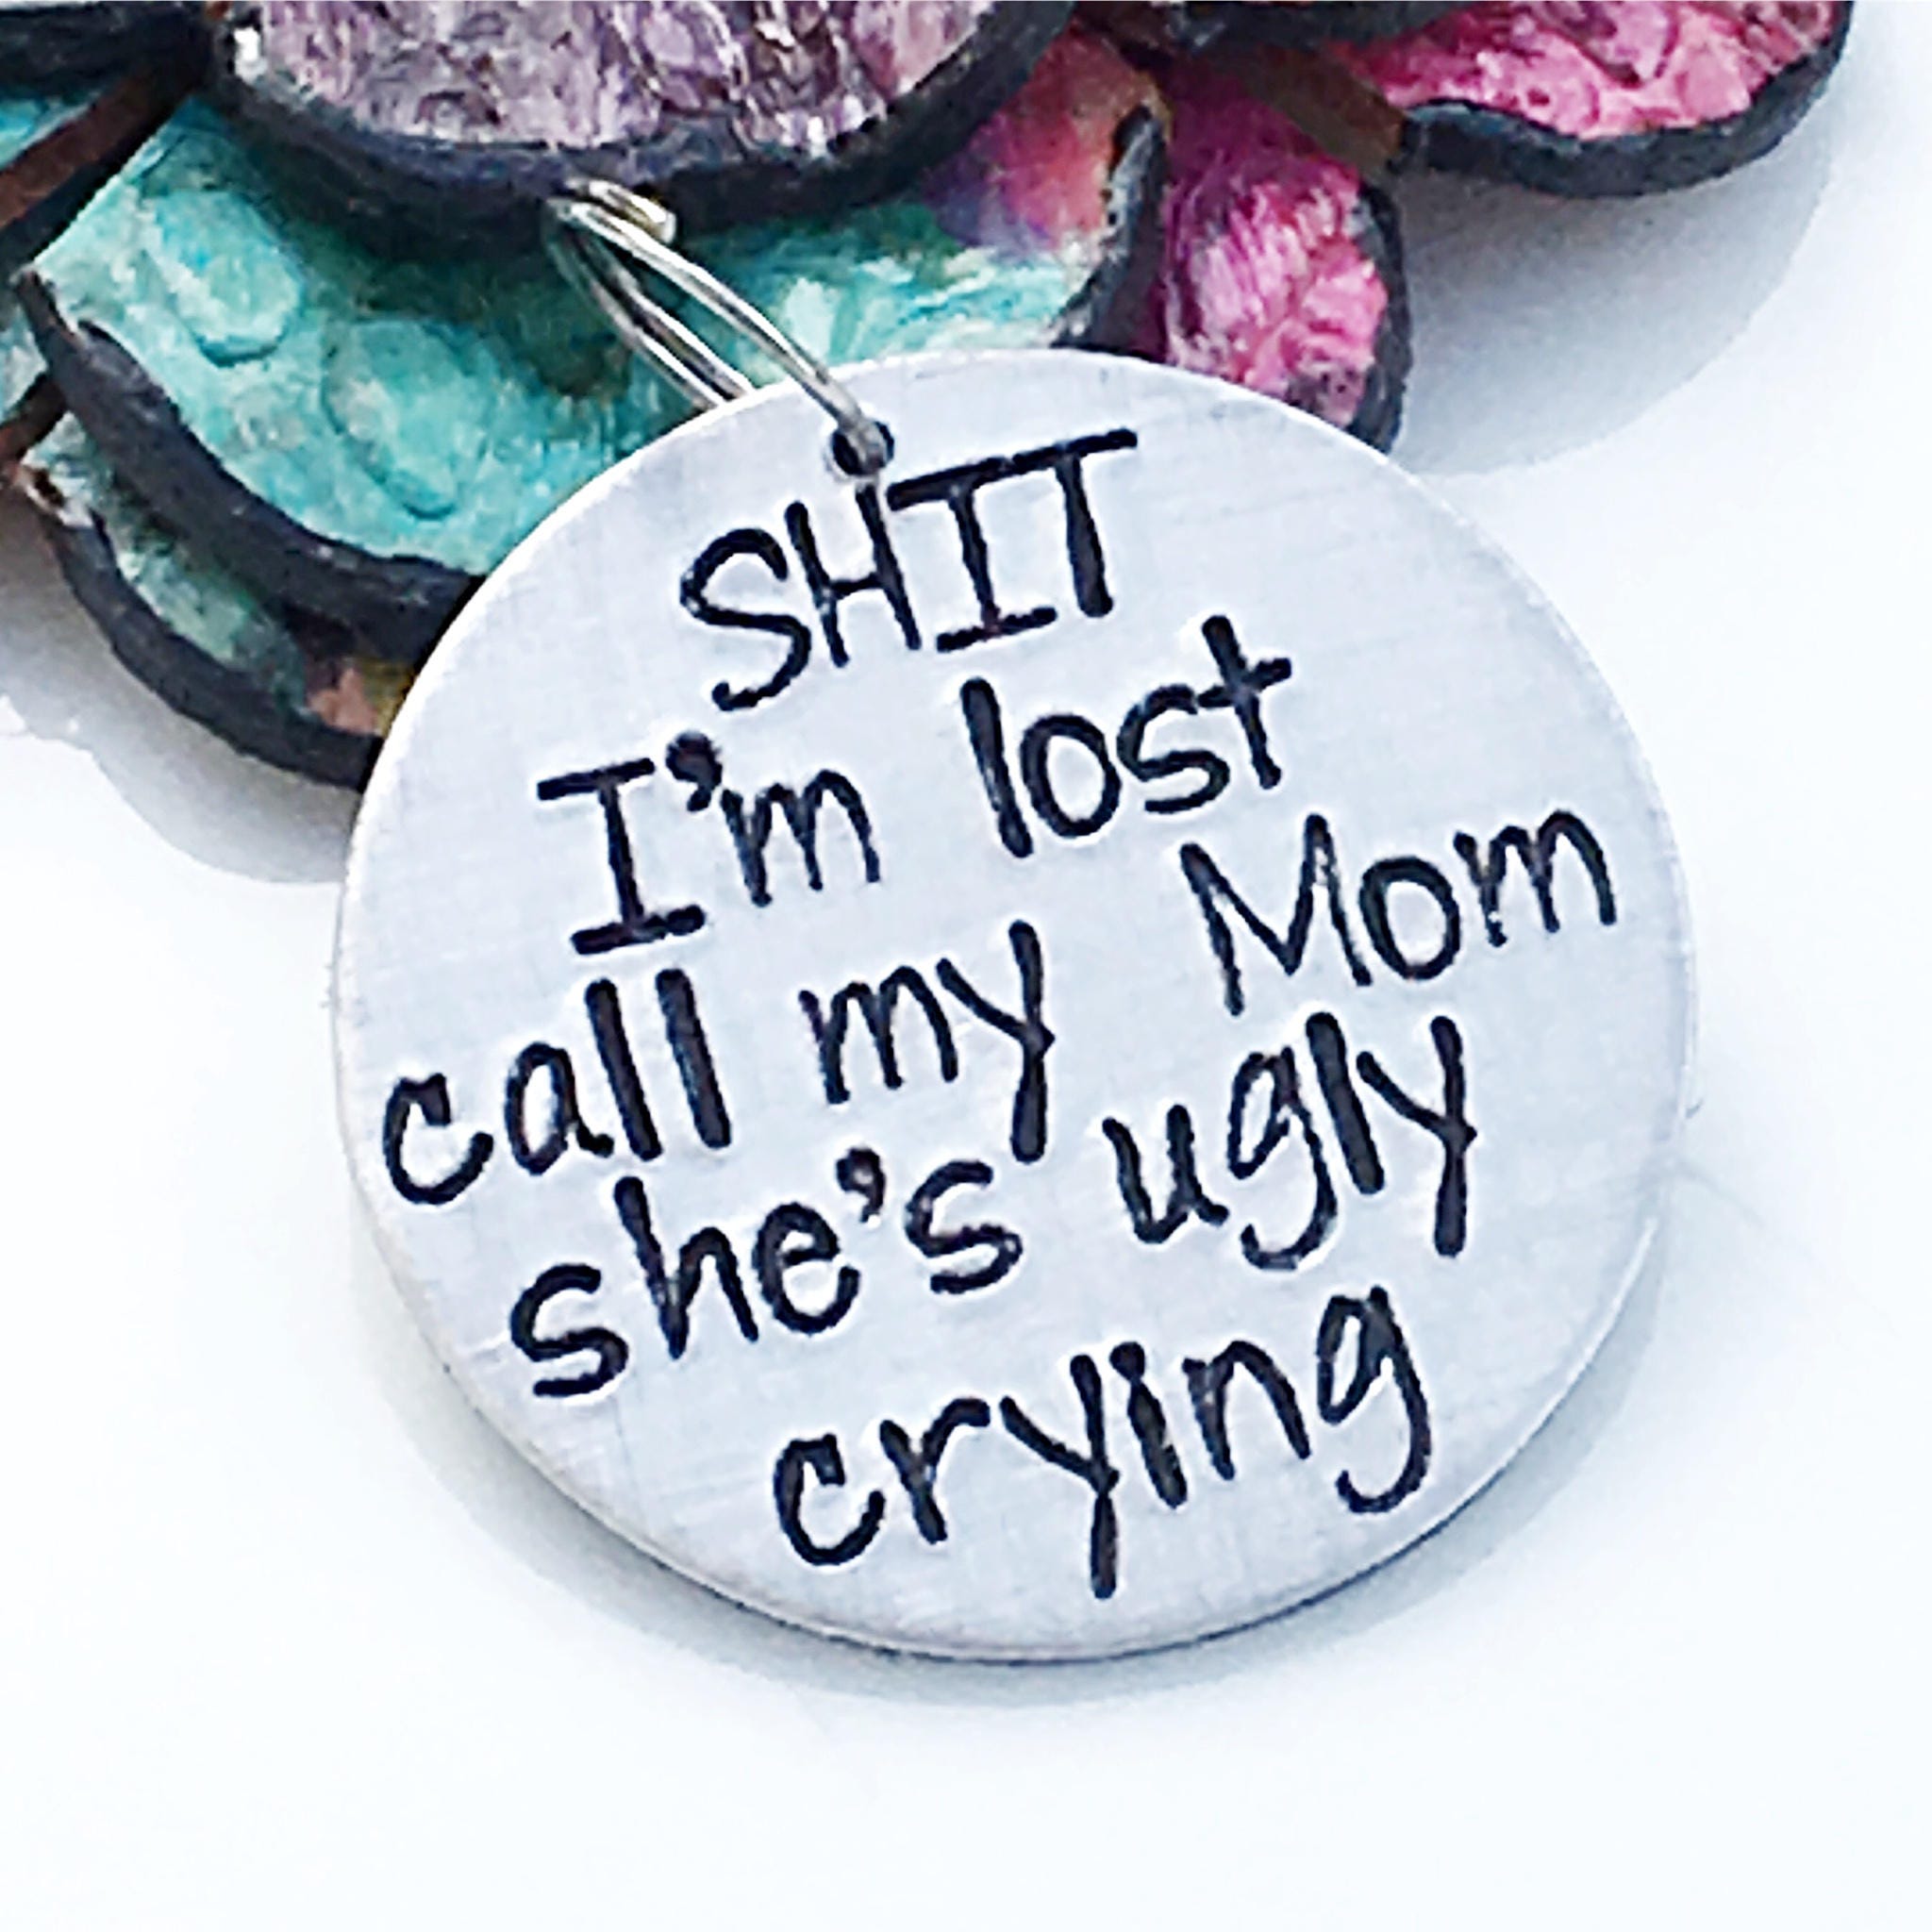 hilarious funny dog tags